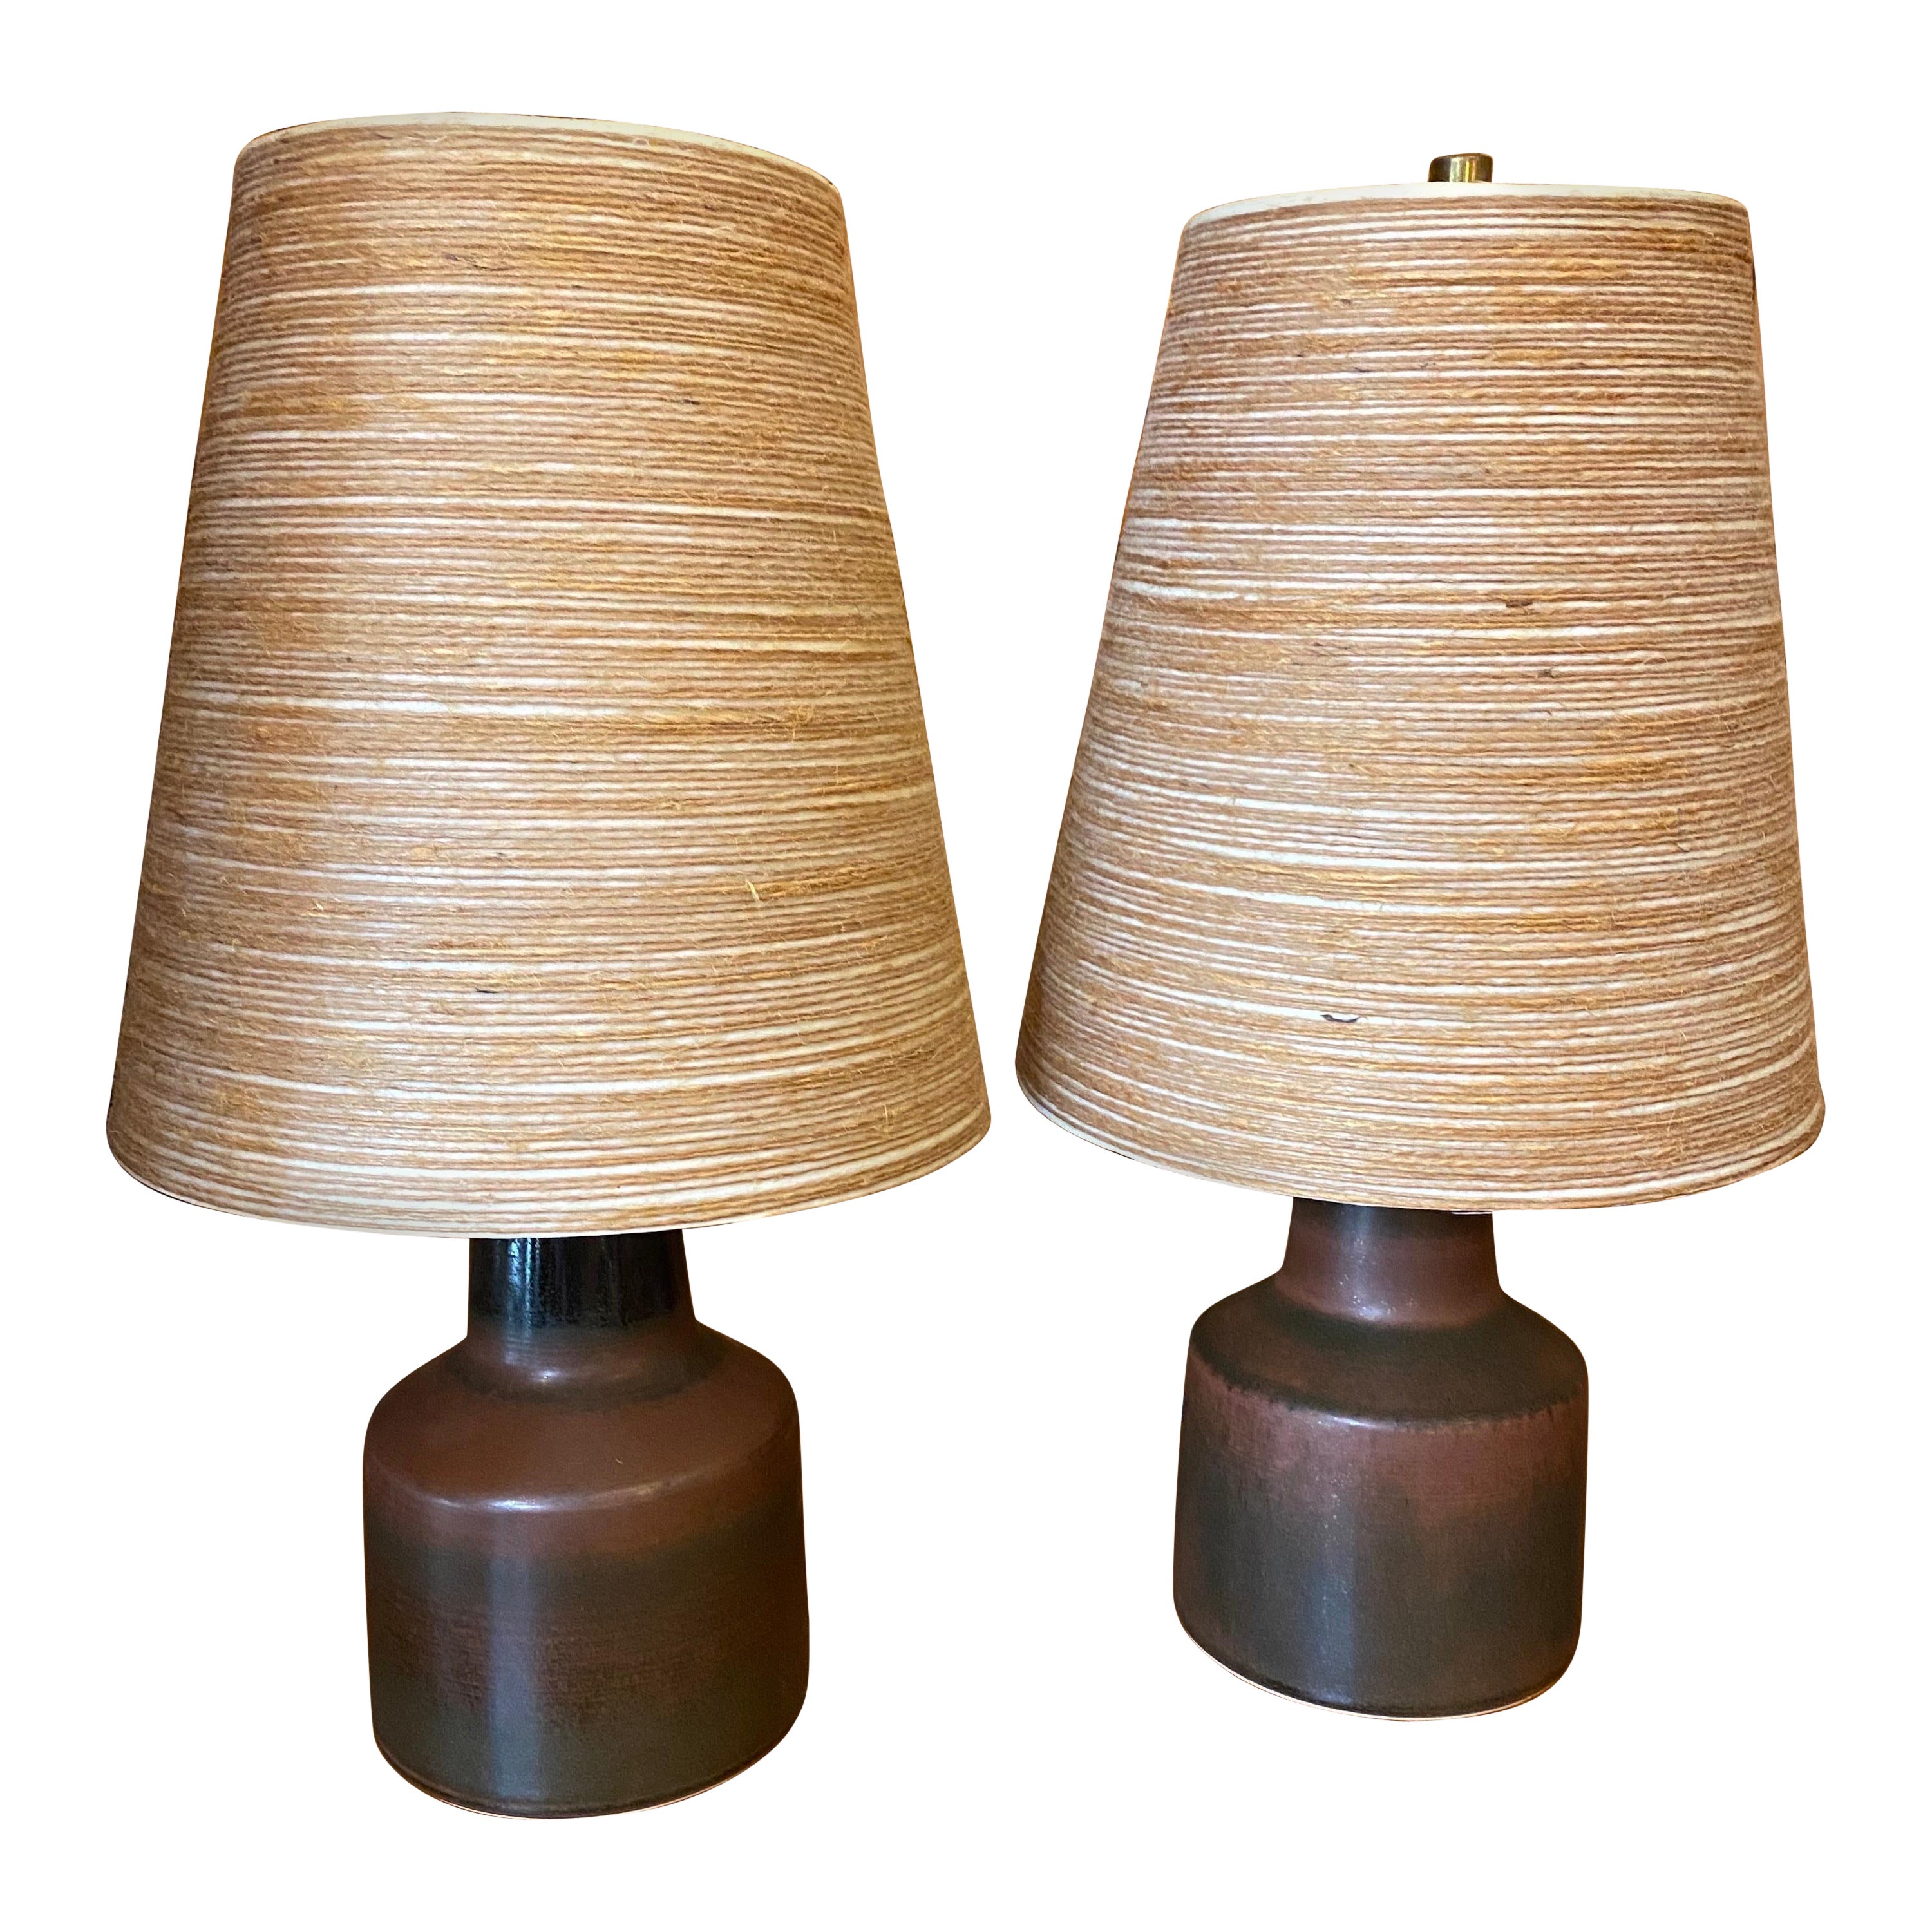 Lotte and Gunnar Bostlund Pair of Table Lamps with Original Shades For Sale